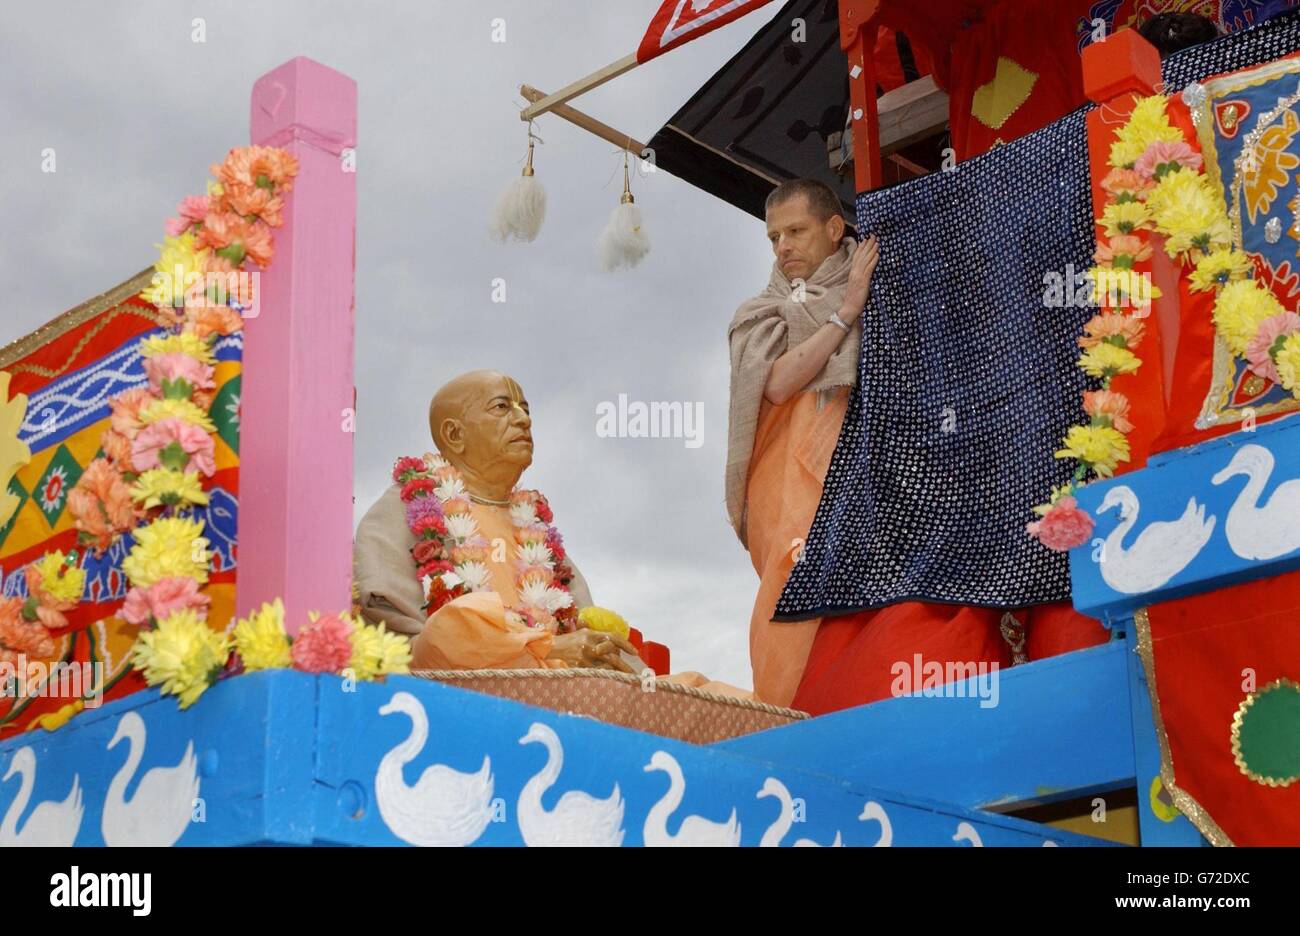 A Hare Krishna devotee watches over a sacred sculpture of the founder of the religious movement borne on a chariot dedicated to Lady Subhadra which was taking part in the 'Ratha-yathra Carnival of Chariots' in central London. It is the first time the group have had permission for more than one chariot to be drawn through the streets. Stock Photo